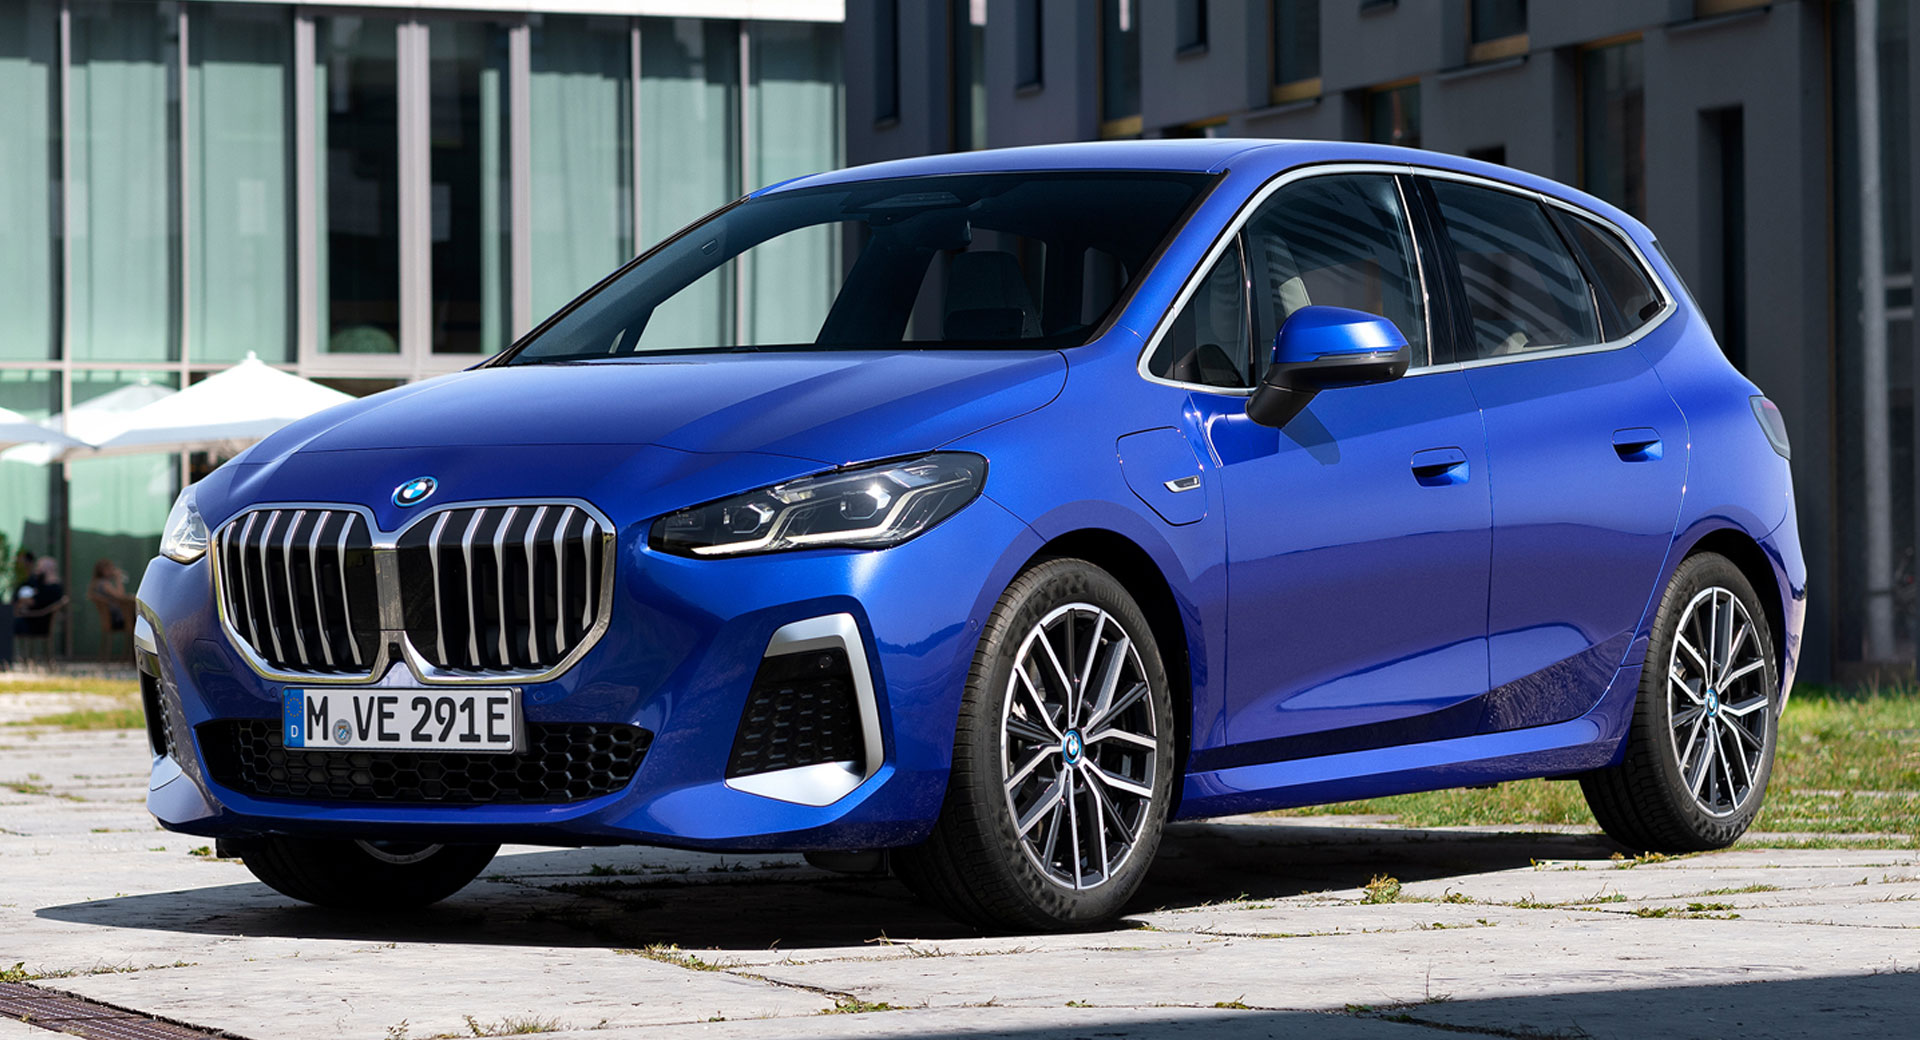 This is the brand new BMW 2 Series Active Tourer